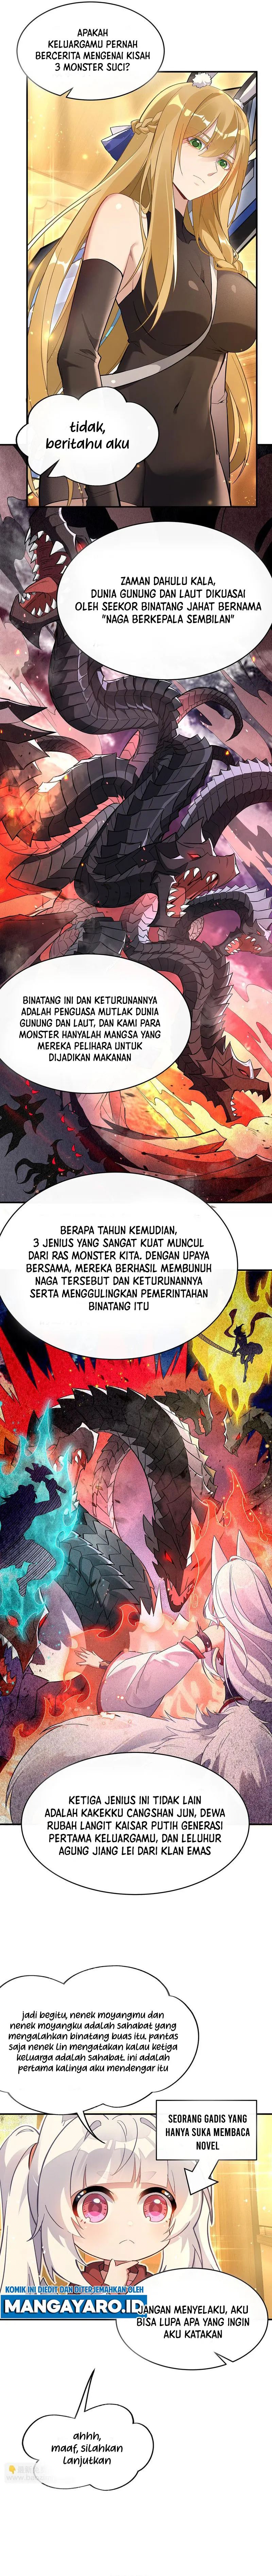 Dilarang COPAS - situs resmi www.mangacanblog.com - Komik my female apprentices are all big shots from the future 229 - chapter 229 230 Indonesia my female apprentices are all big shots from the future 229 - chapter 229 Terbaru 1|Baca Manga Komik Indonesia|Mangacan